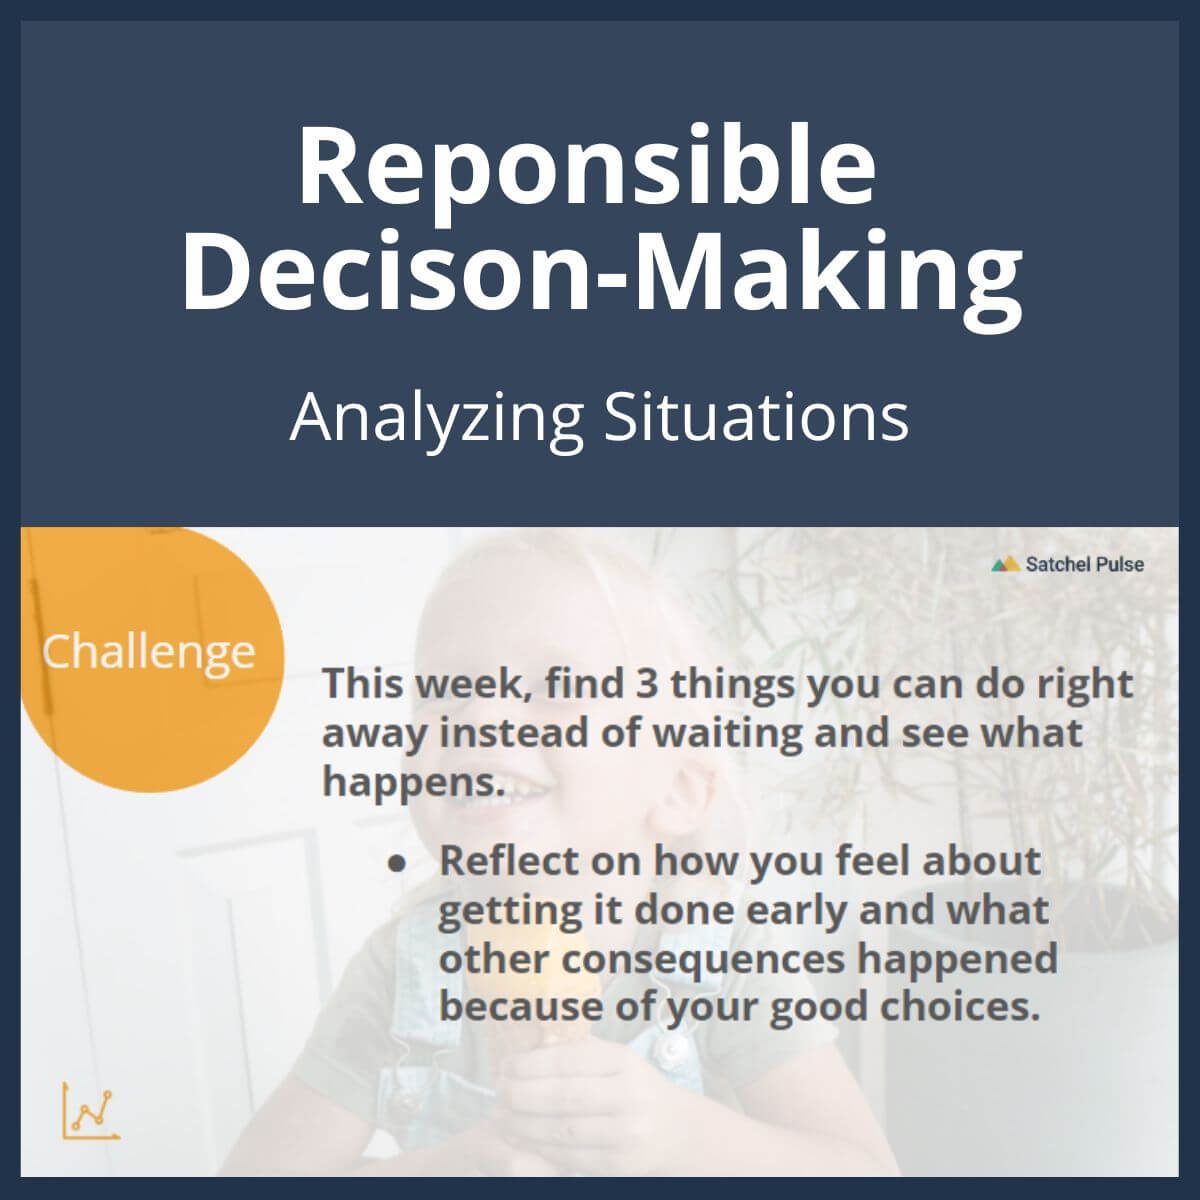 SEL Lesson focusing on Analyzing Situations to use in your classroom as one of your SEL activities for Responsible Decision-Making